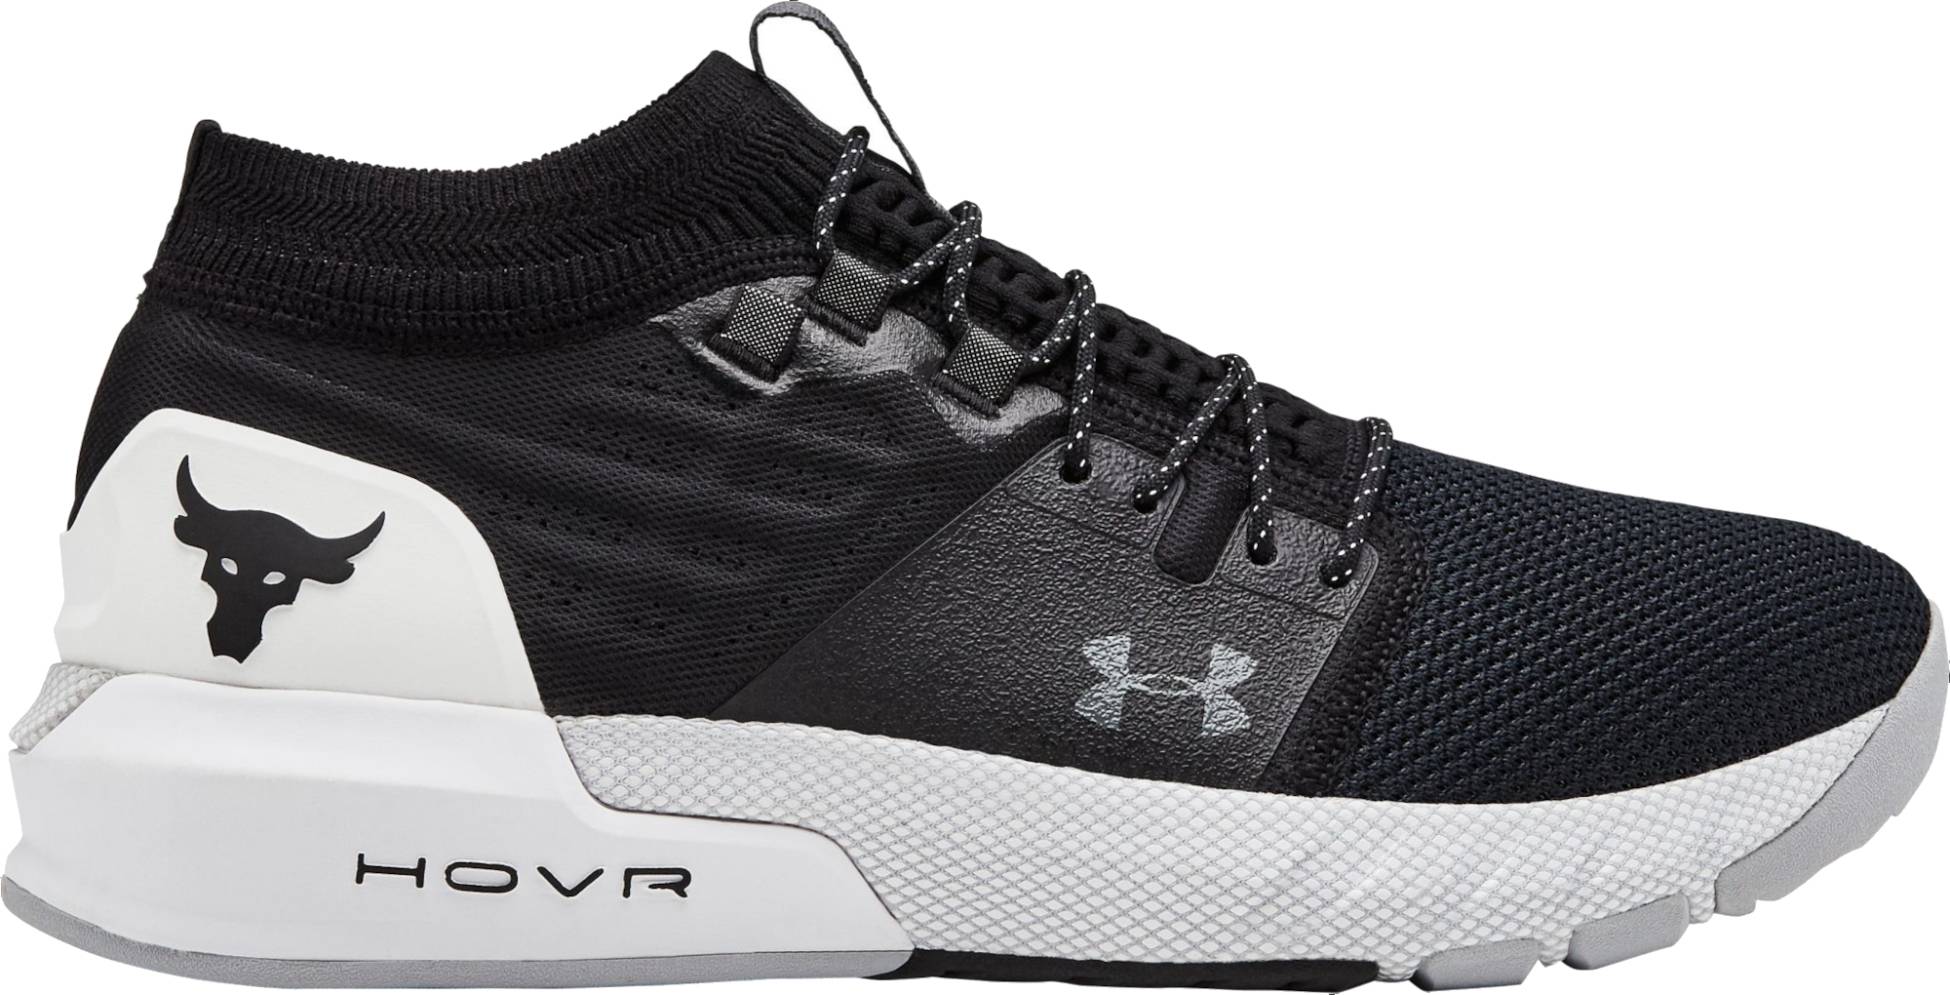 Save 33% on Under Armour Workout Shoes 